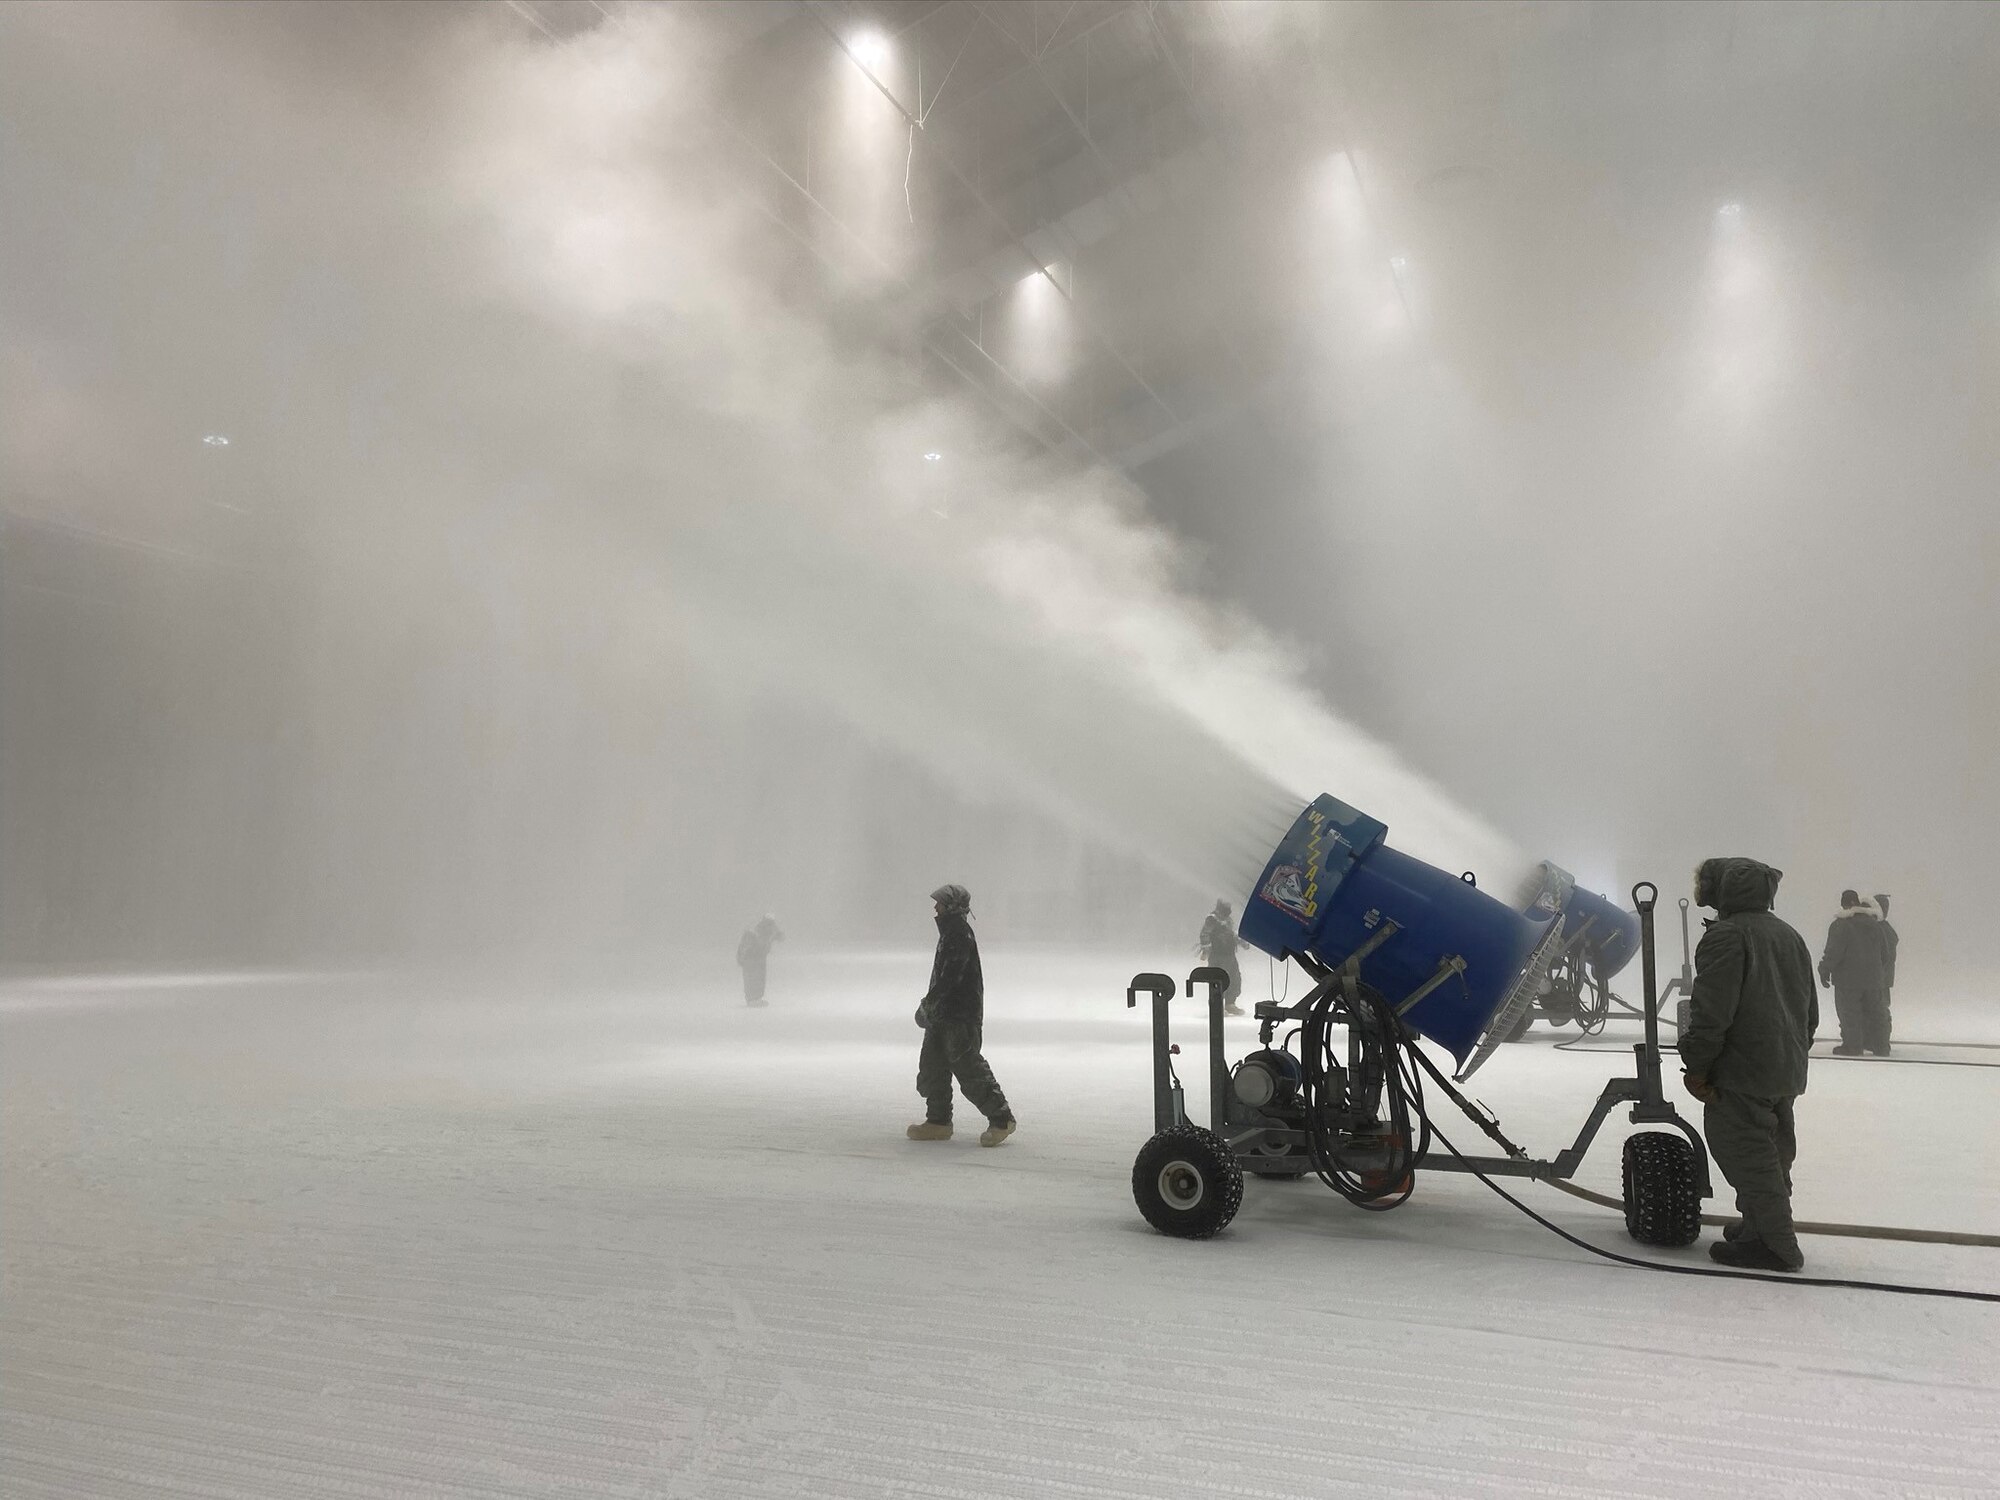 Team members at the McKinley Climatic Laboratory at Eglin Air Force Base, Florida, use machines to create snow in the MCL Main Chamber to prepare for environmental testing. Those at the MCL recently celebrated the 75th anniversary of the facility. The first tests at the MCL occurred in May 1947. The MCL is operated by the 717th Test Squadron, 804th Test Group, Arnold Engineering Development Complex. (U.S. Air Force photo by William Higdon)